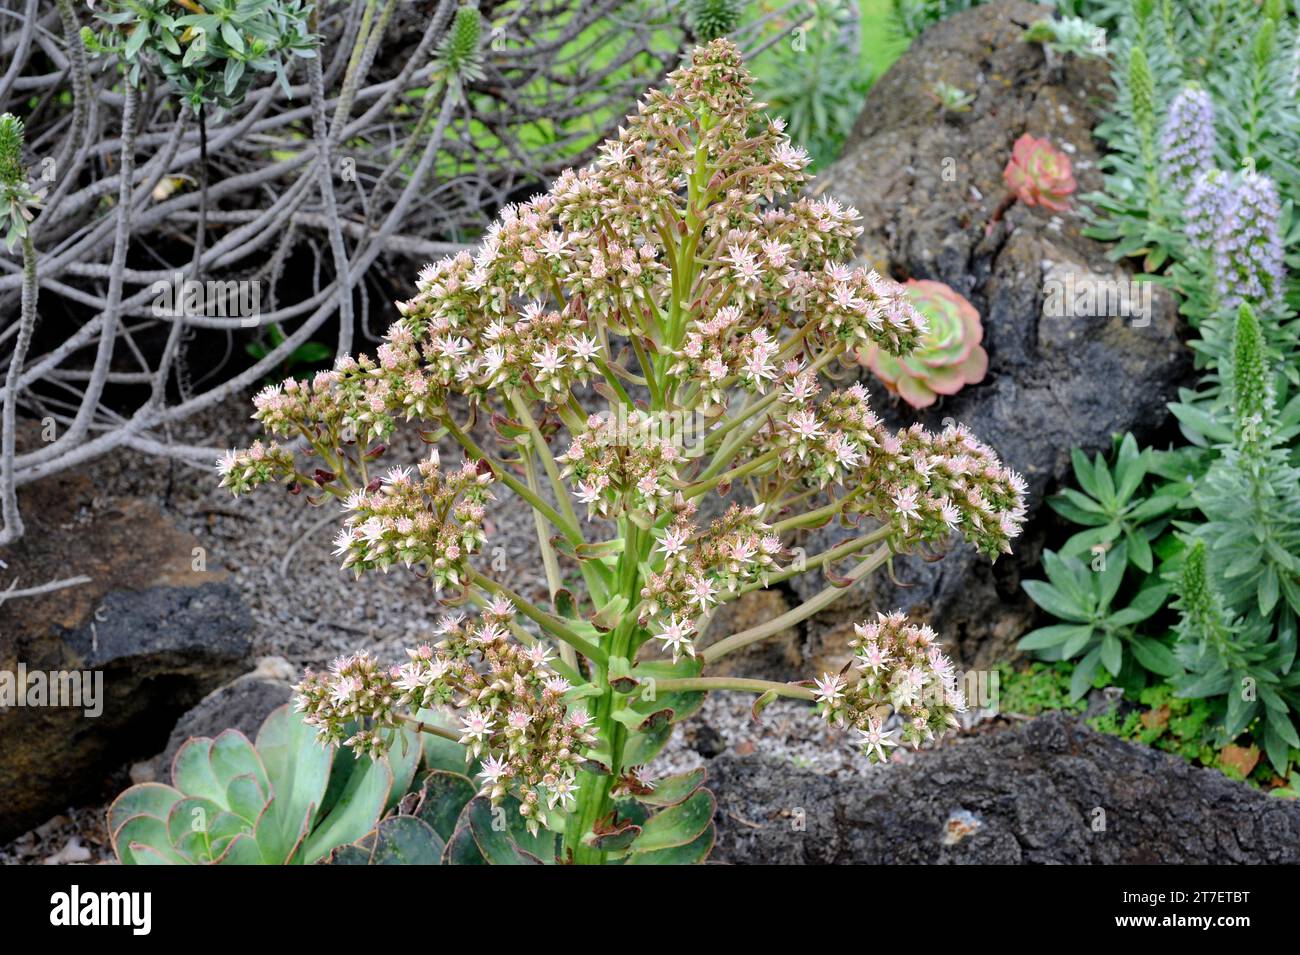 Bejeque sanjora (Aeonium hierrense) is a succulent shrub endemic to El Hierro and La Palma, Canary Islands, Spain. Stock Photo